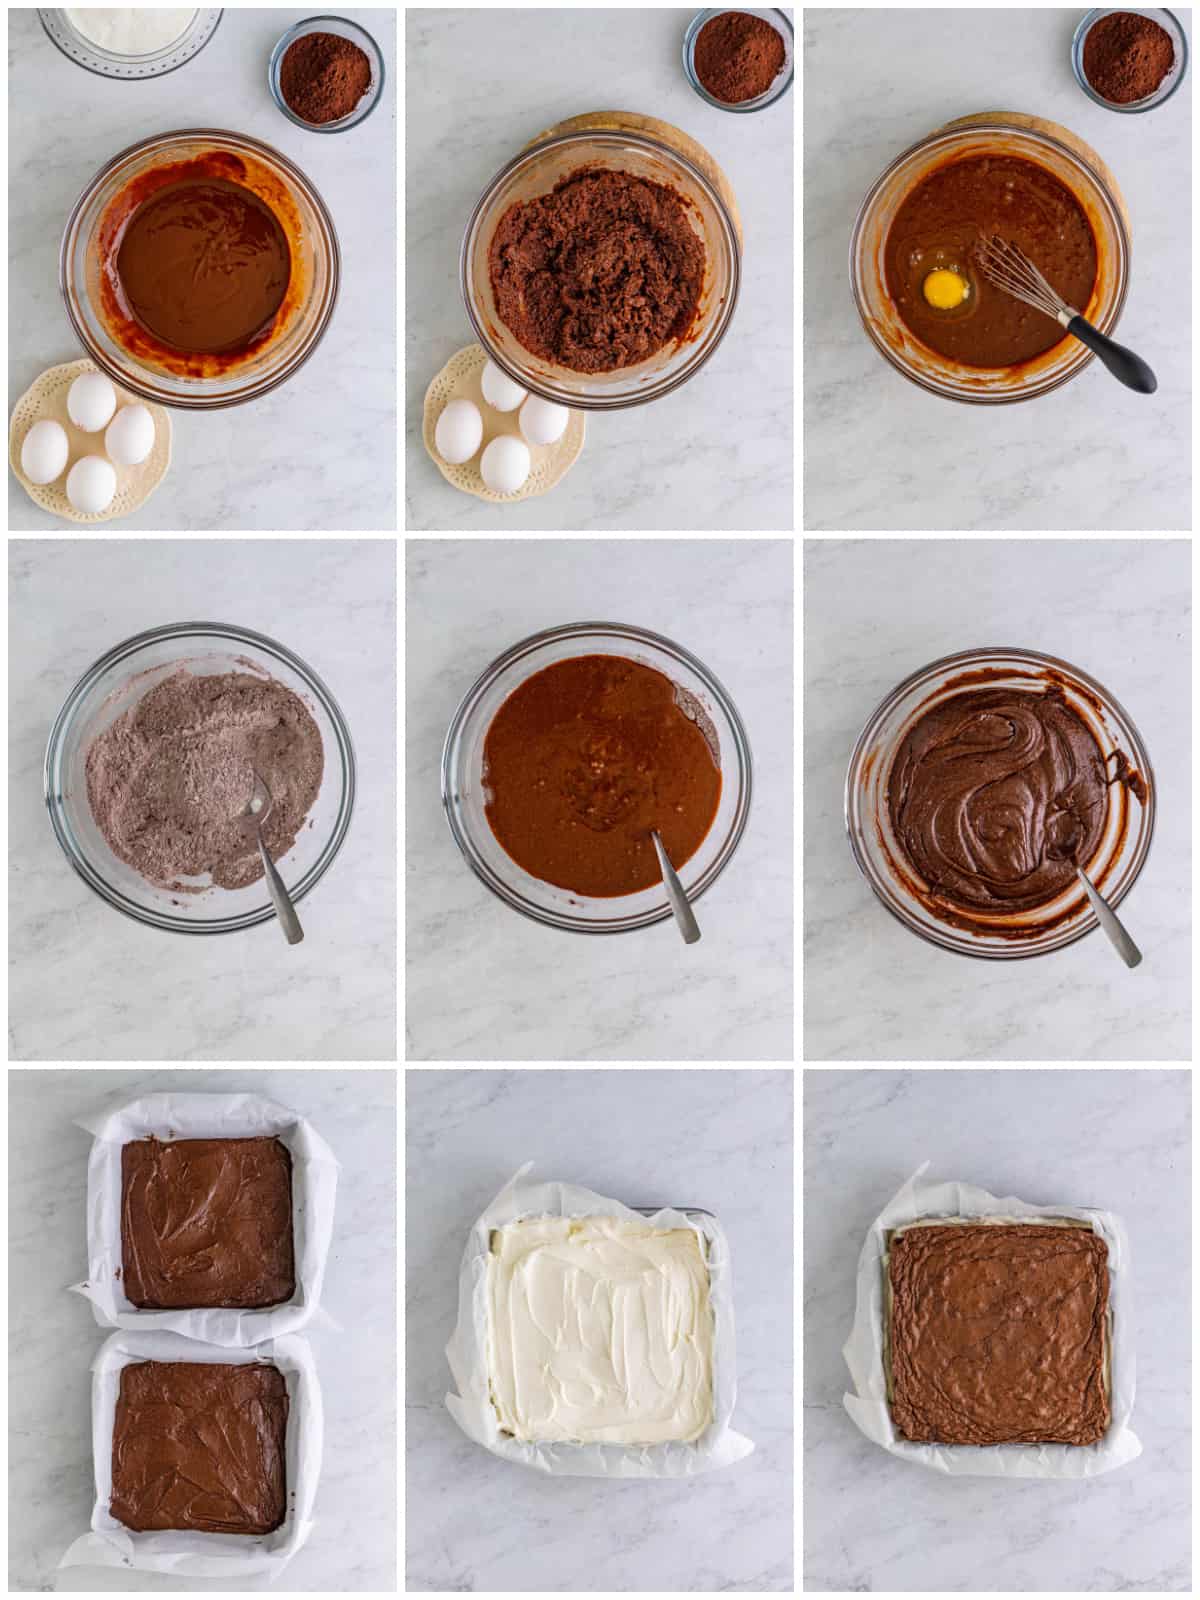 Step by step photos on how to make Brownie Ice Cream Sandwiches.